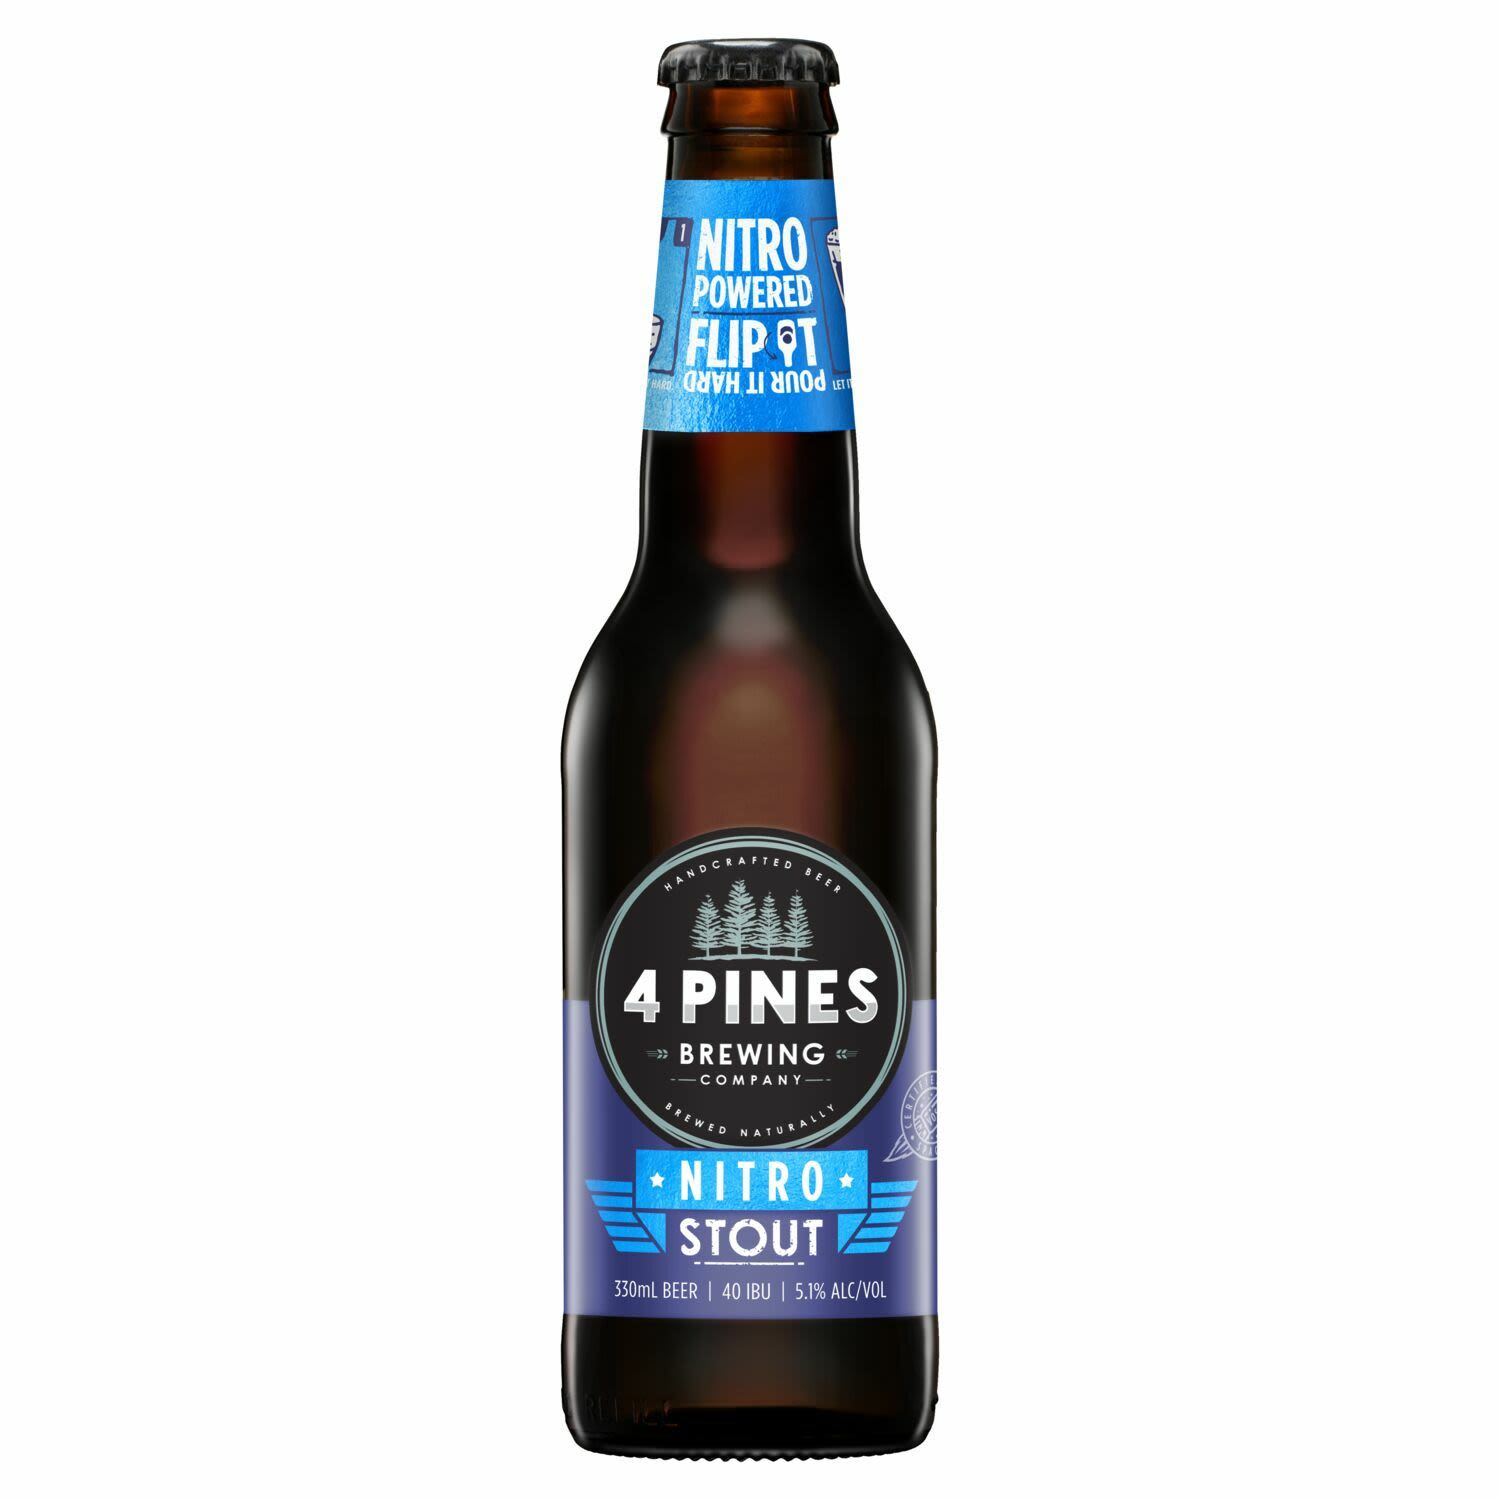 The world's first space beer, 4 Pines Stout, has been created by the pioneering crew at 4 Pines Brewing! Engineered along with Saber Astronautics, 4 Pines Stout is the very first beer able to be enjoyed in zero gravity! With Space tourism about to go mainstream, it simply makes too much sense for this beer that is brewed in the traditional Irish style with a full, creamy head, rich deep body of chocolate and caramel, not to be be able to enjoyed at such lofty altitudes. The other great bonus is it tastes just as delicious down here on earth!<br /> <br />Alcohol Volume: 5.10%<br /><br />Pack Format: Bottle<br /><br />Standard Drinks: 1.3</br /><br />Pack Type: Bottle<br /><br />Country of Origin: Australia<br />